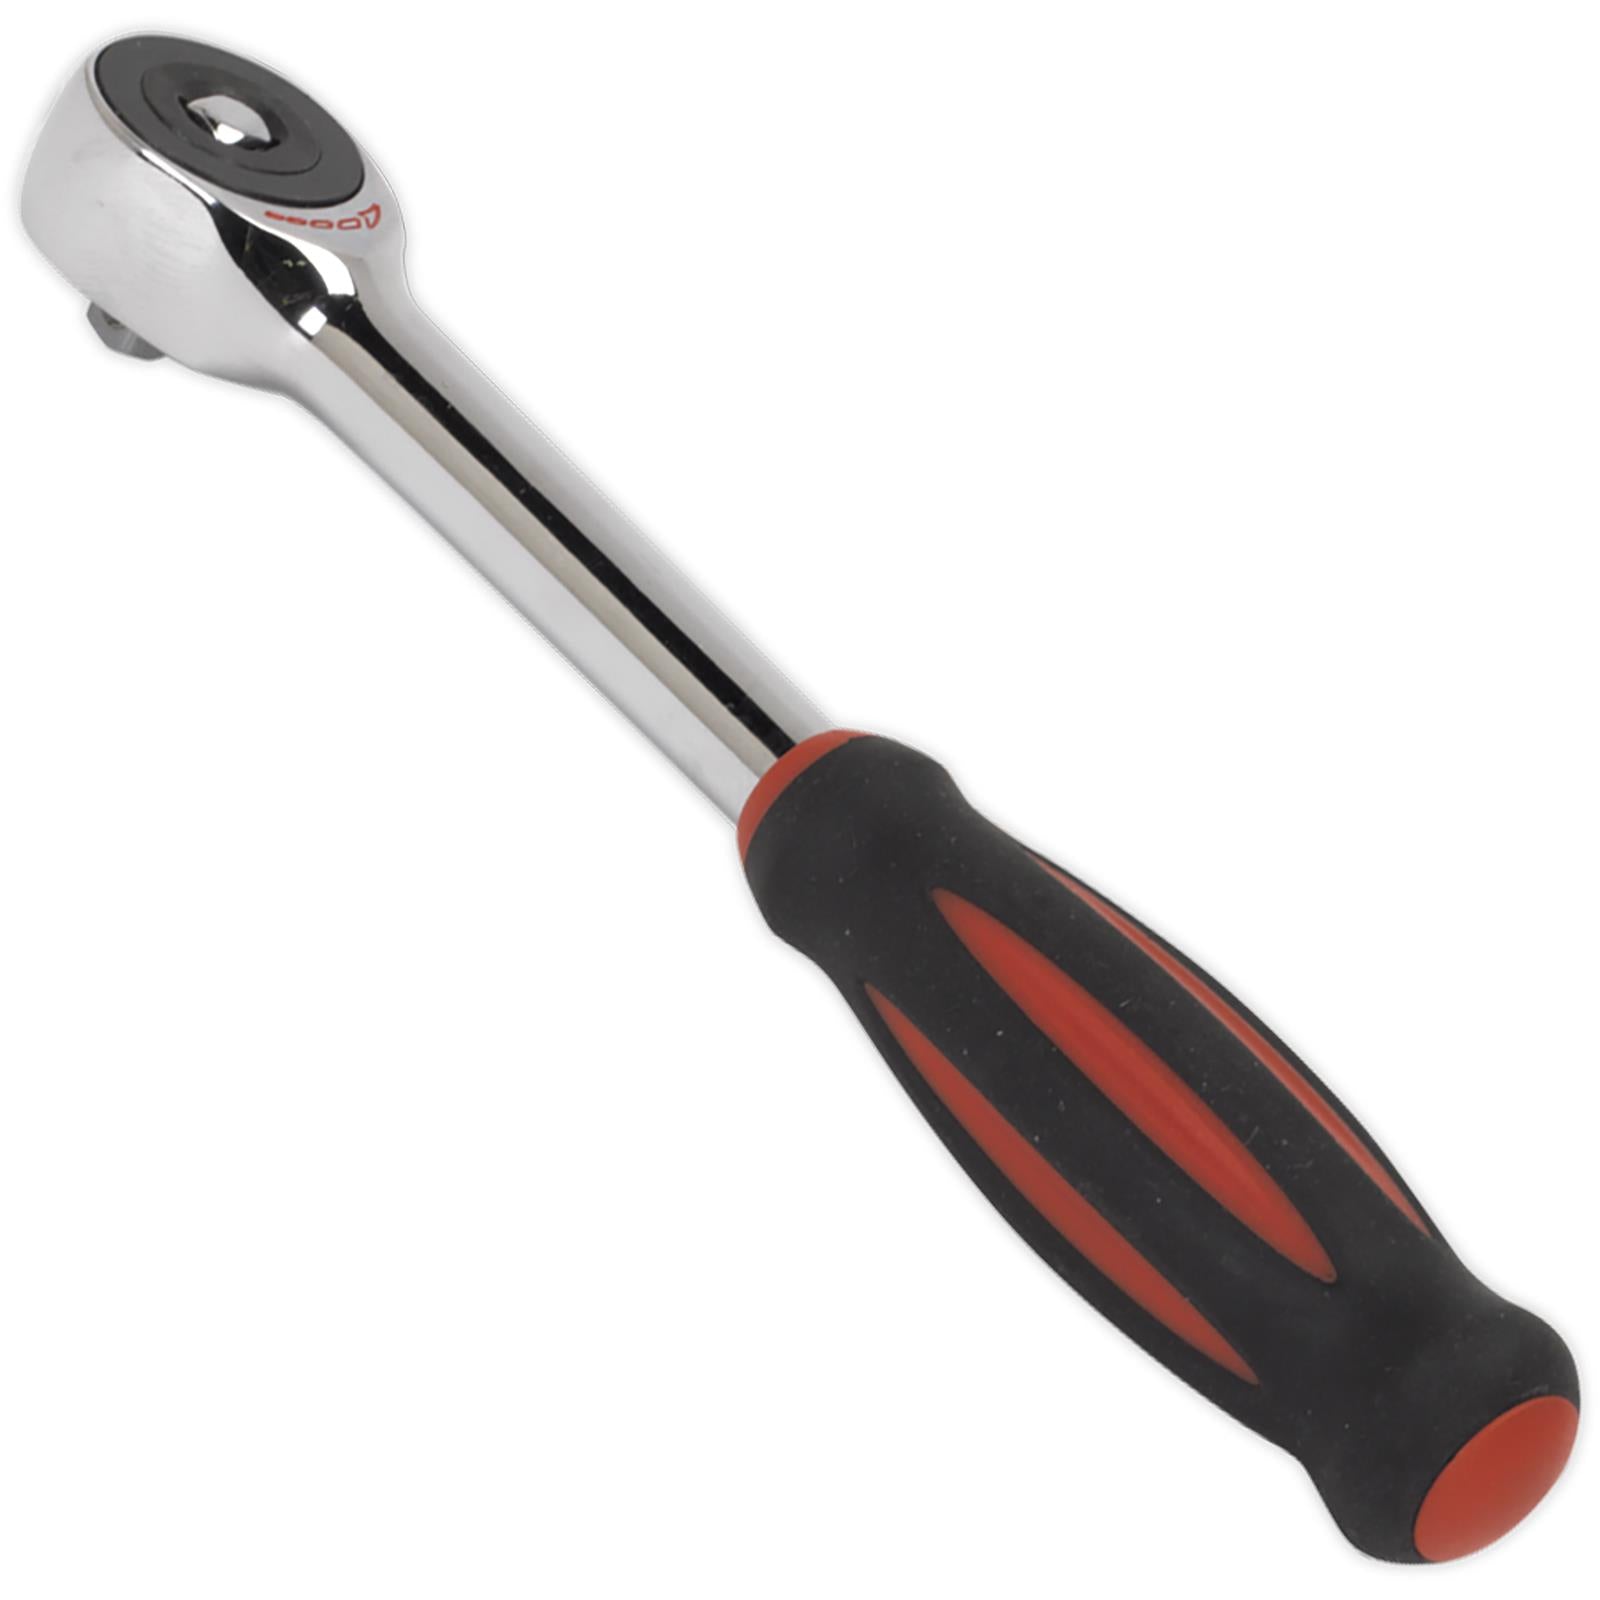 Sealey Ratchet Speed Wrench Handle 1/2" Drive Push Through Reverse Premier